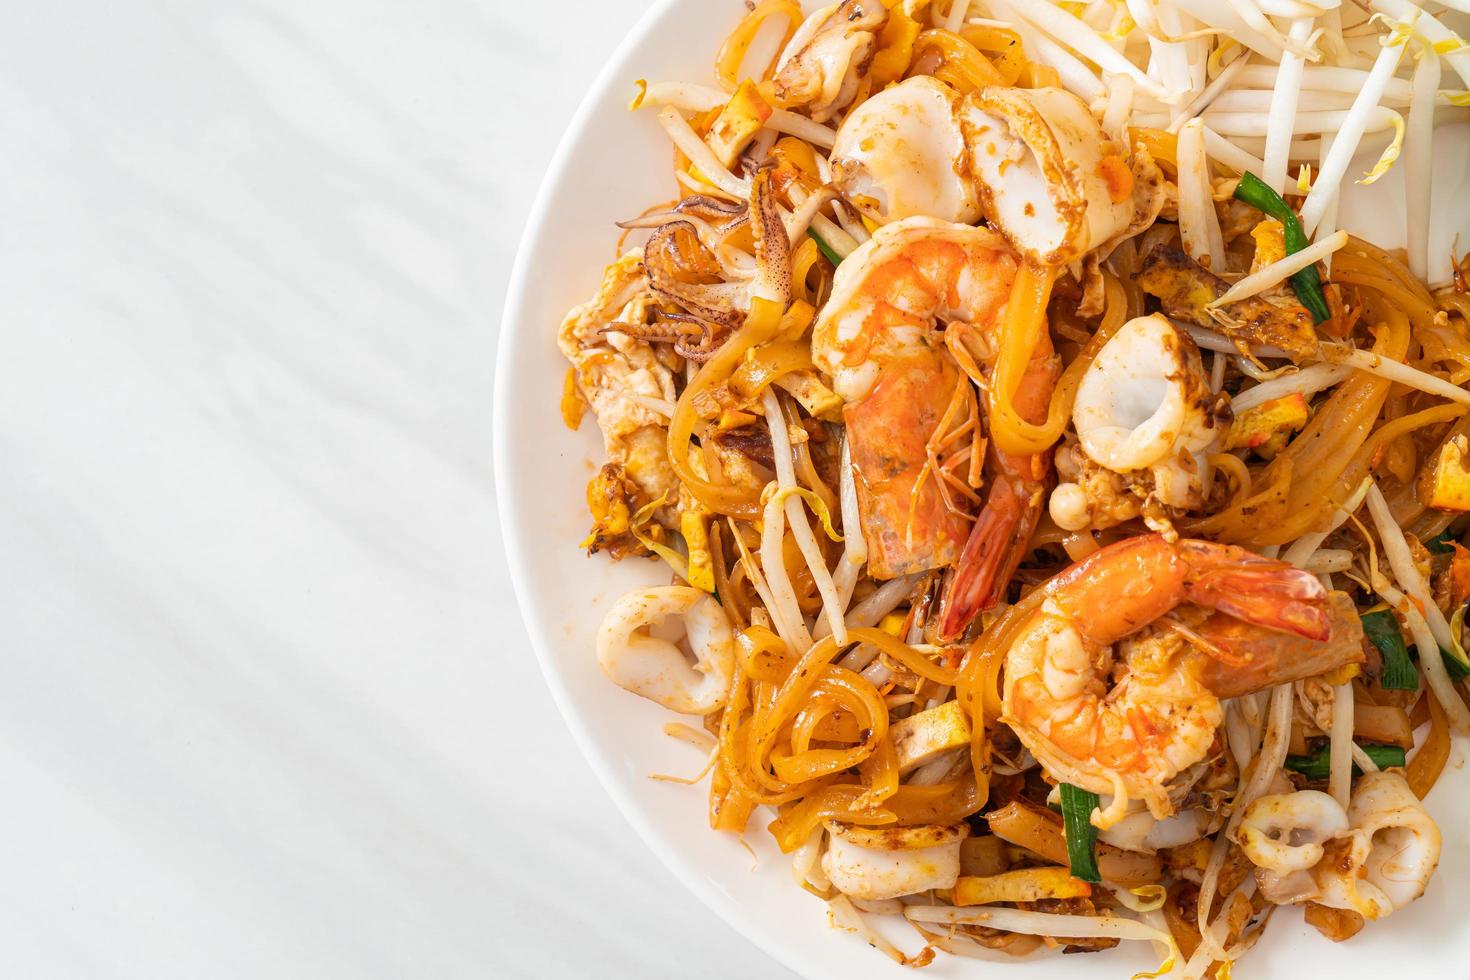 Stir fried noodles with shrimps, squid or octopus and tofu photo